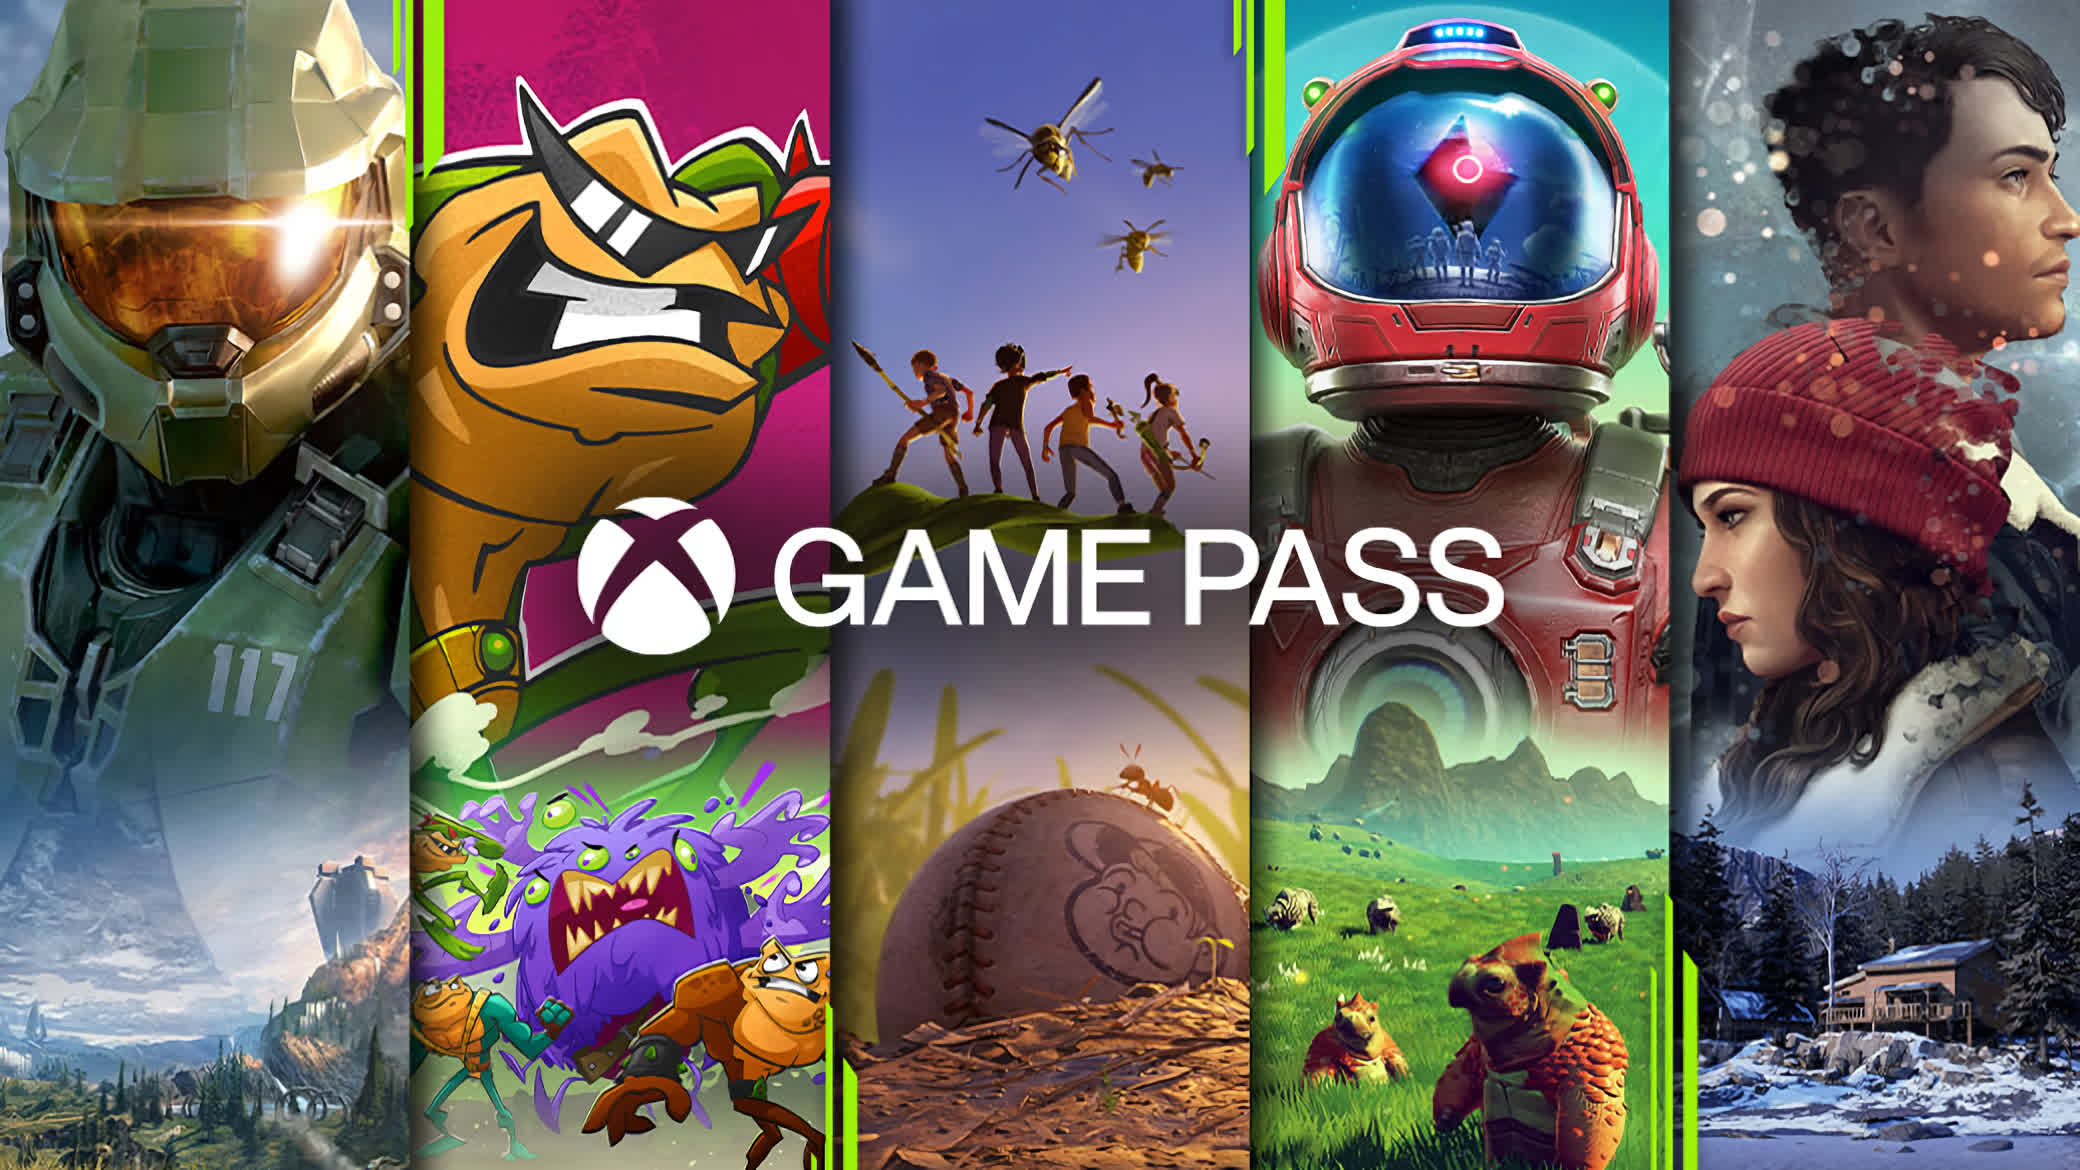 Xbox Game Pass monthly additions include Crusaders Kings III, Shredders and F1 2021